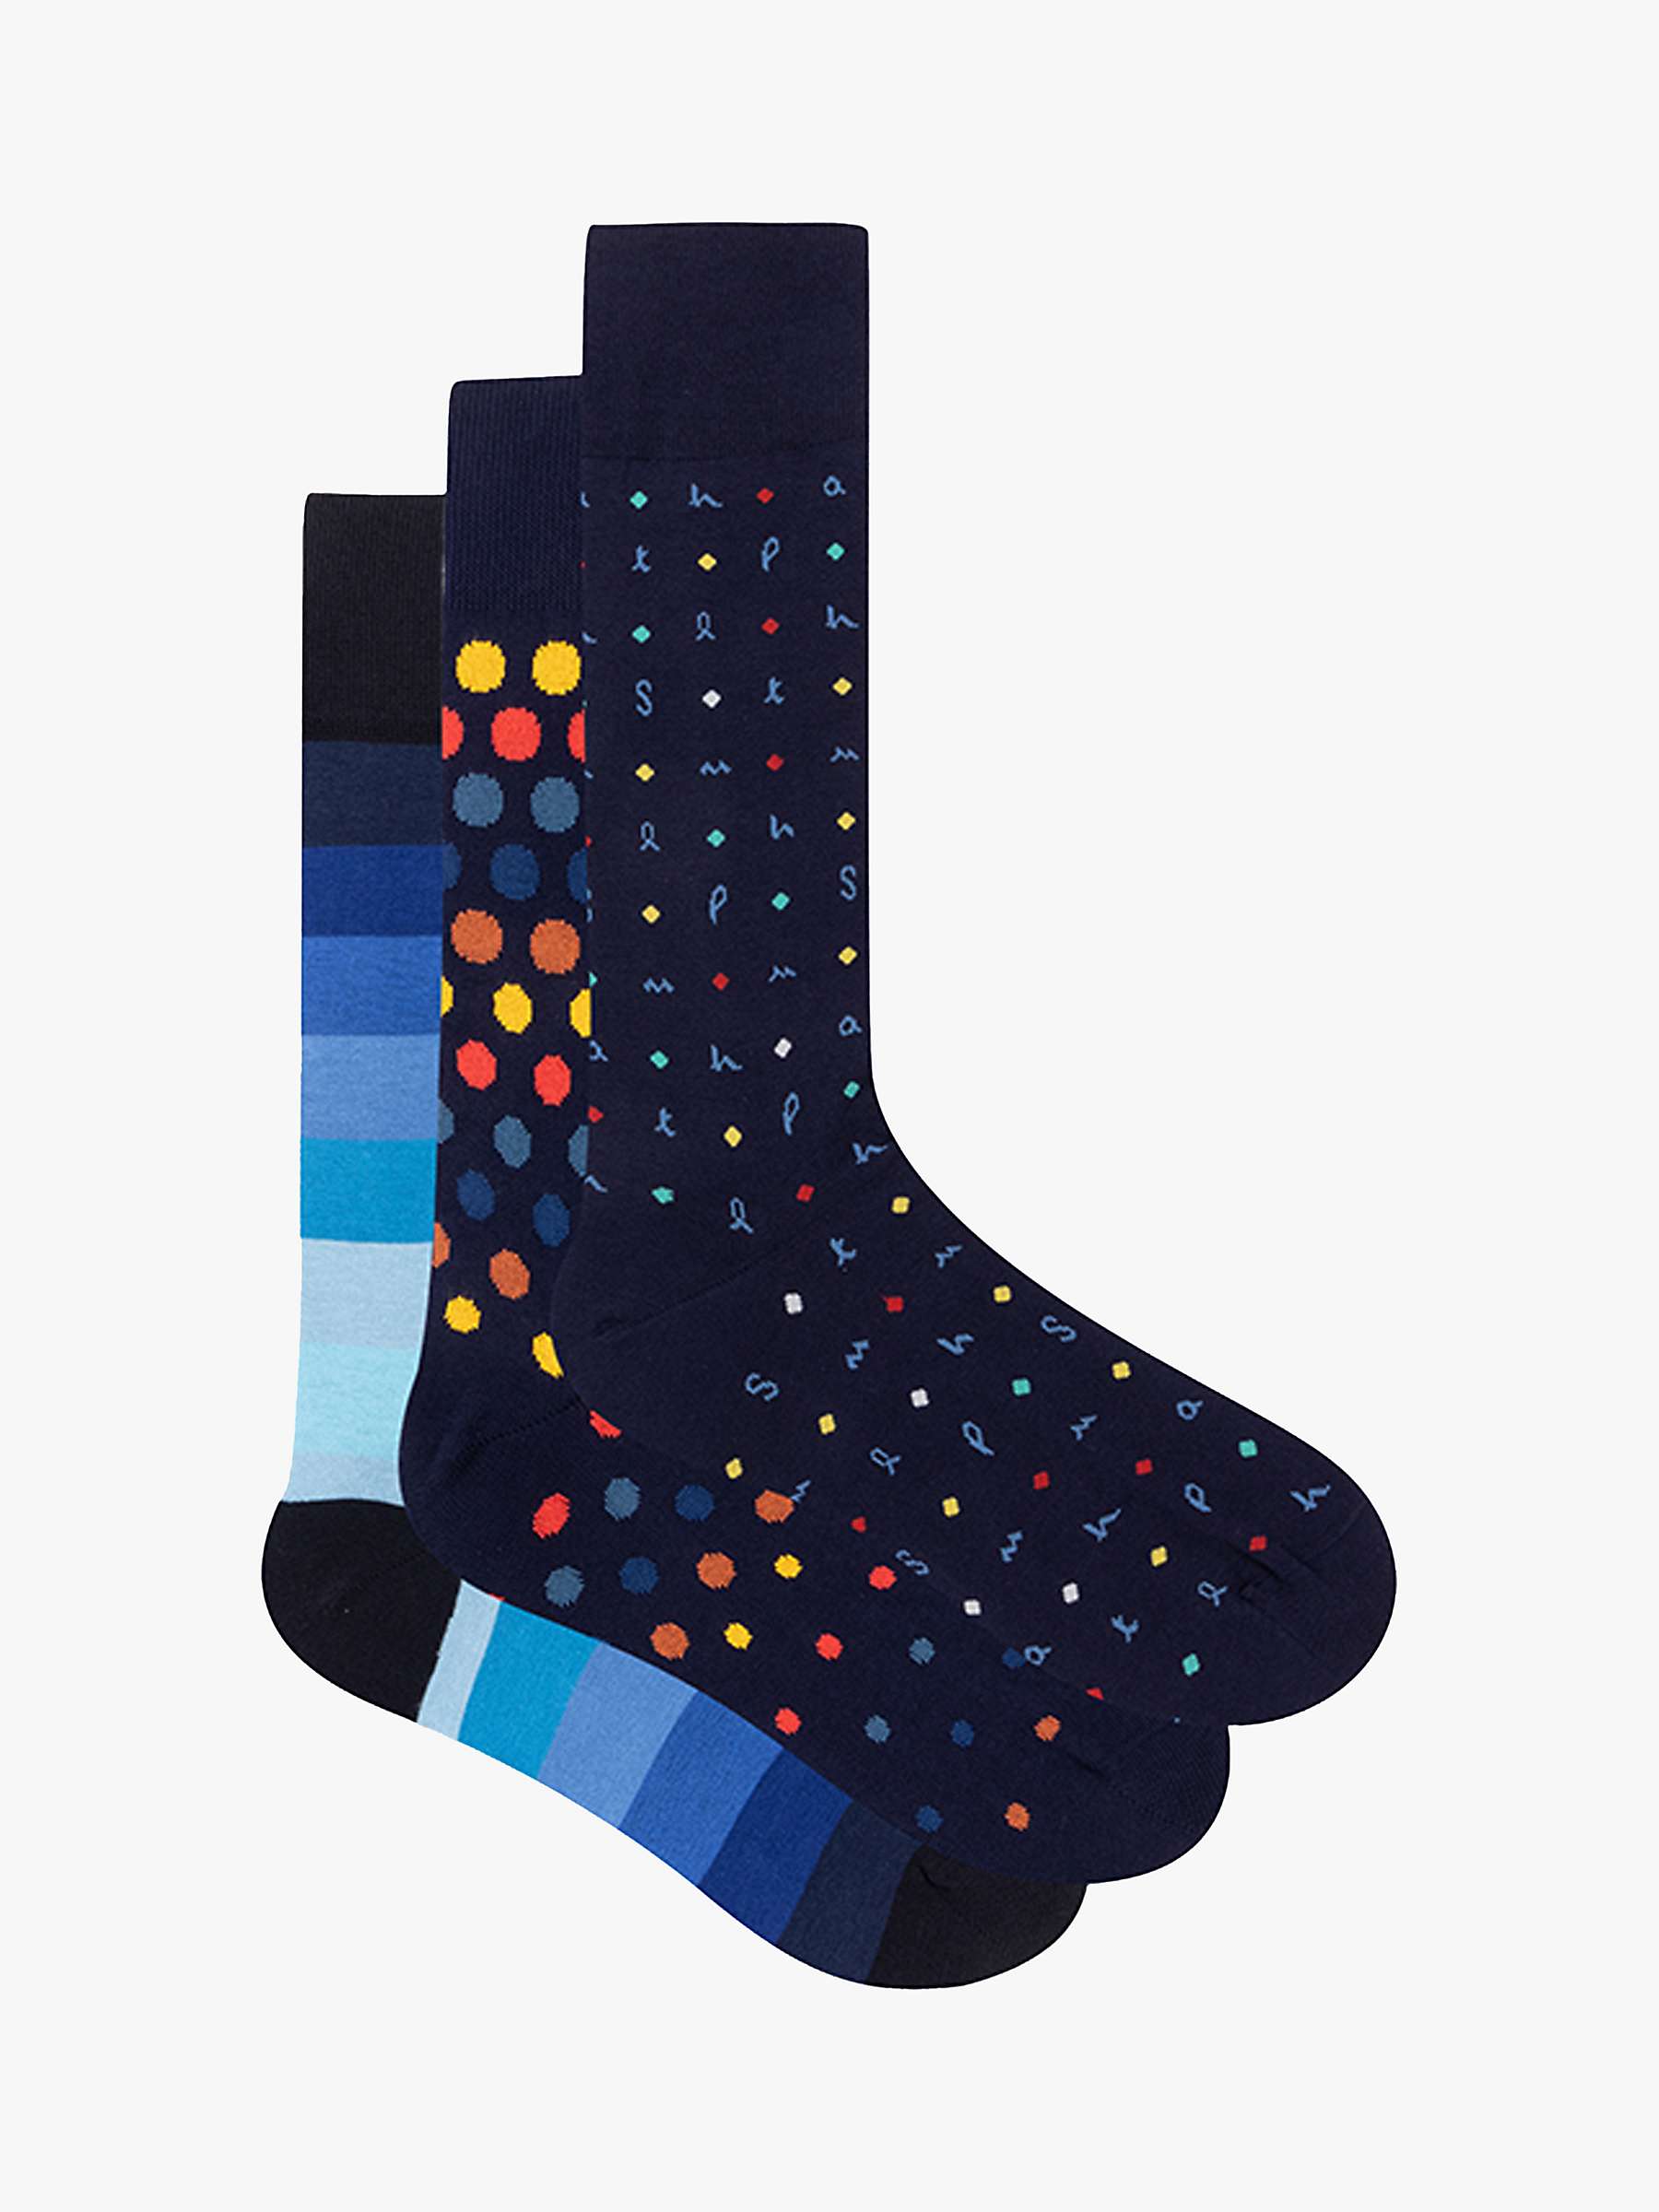 Buy Paul Smith Mix Cotton Socks, Pack of 3, Multi Online at johnlewis.com